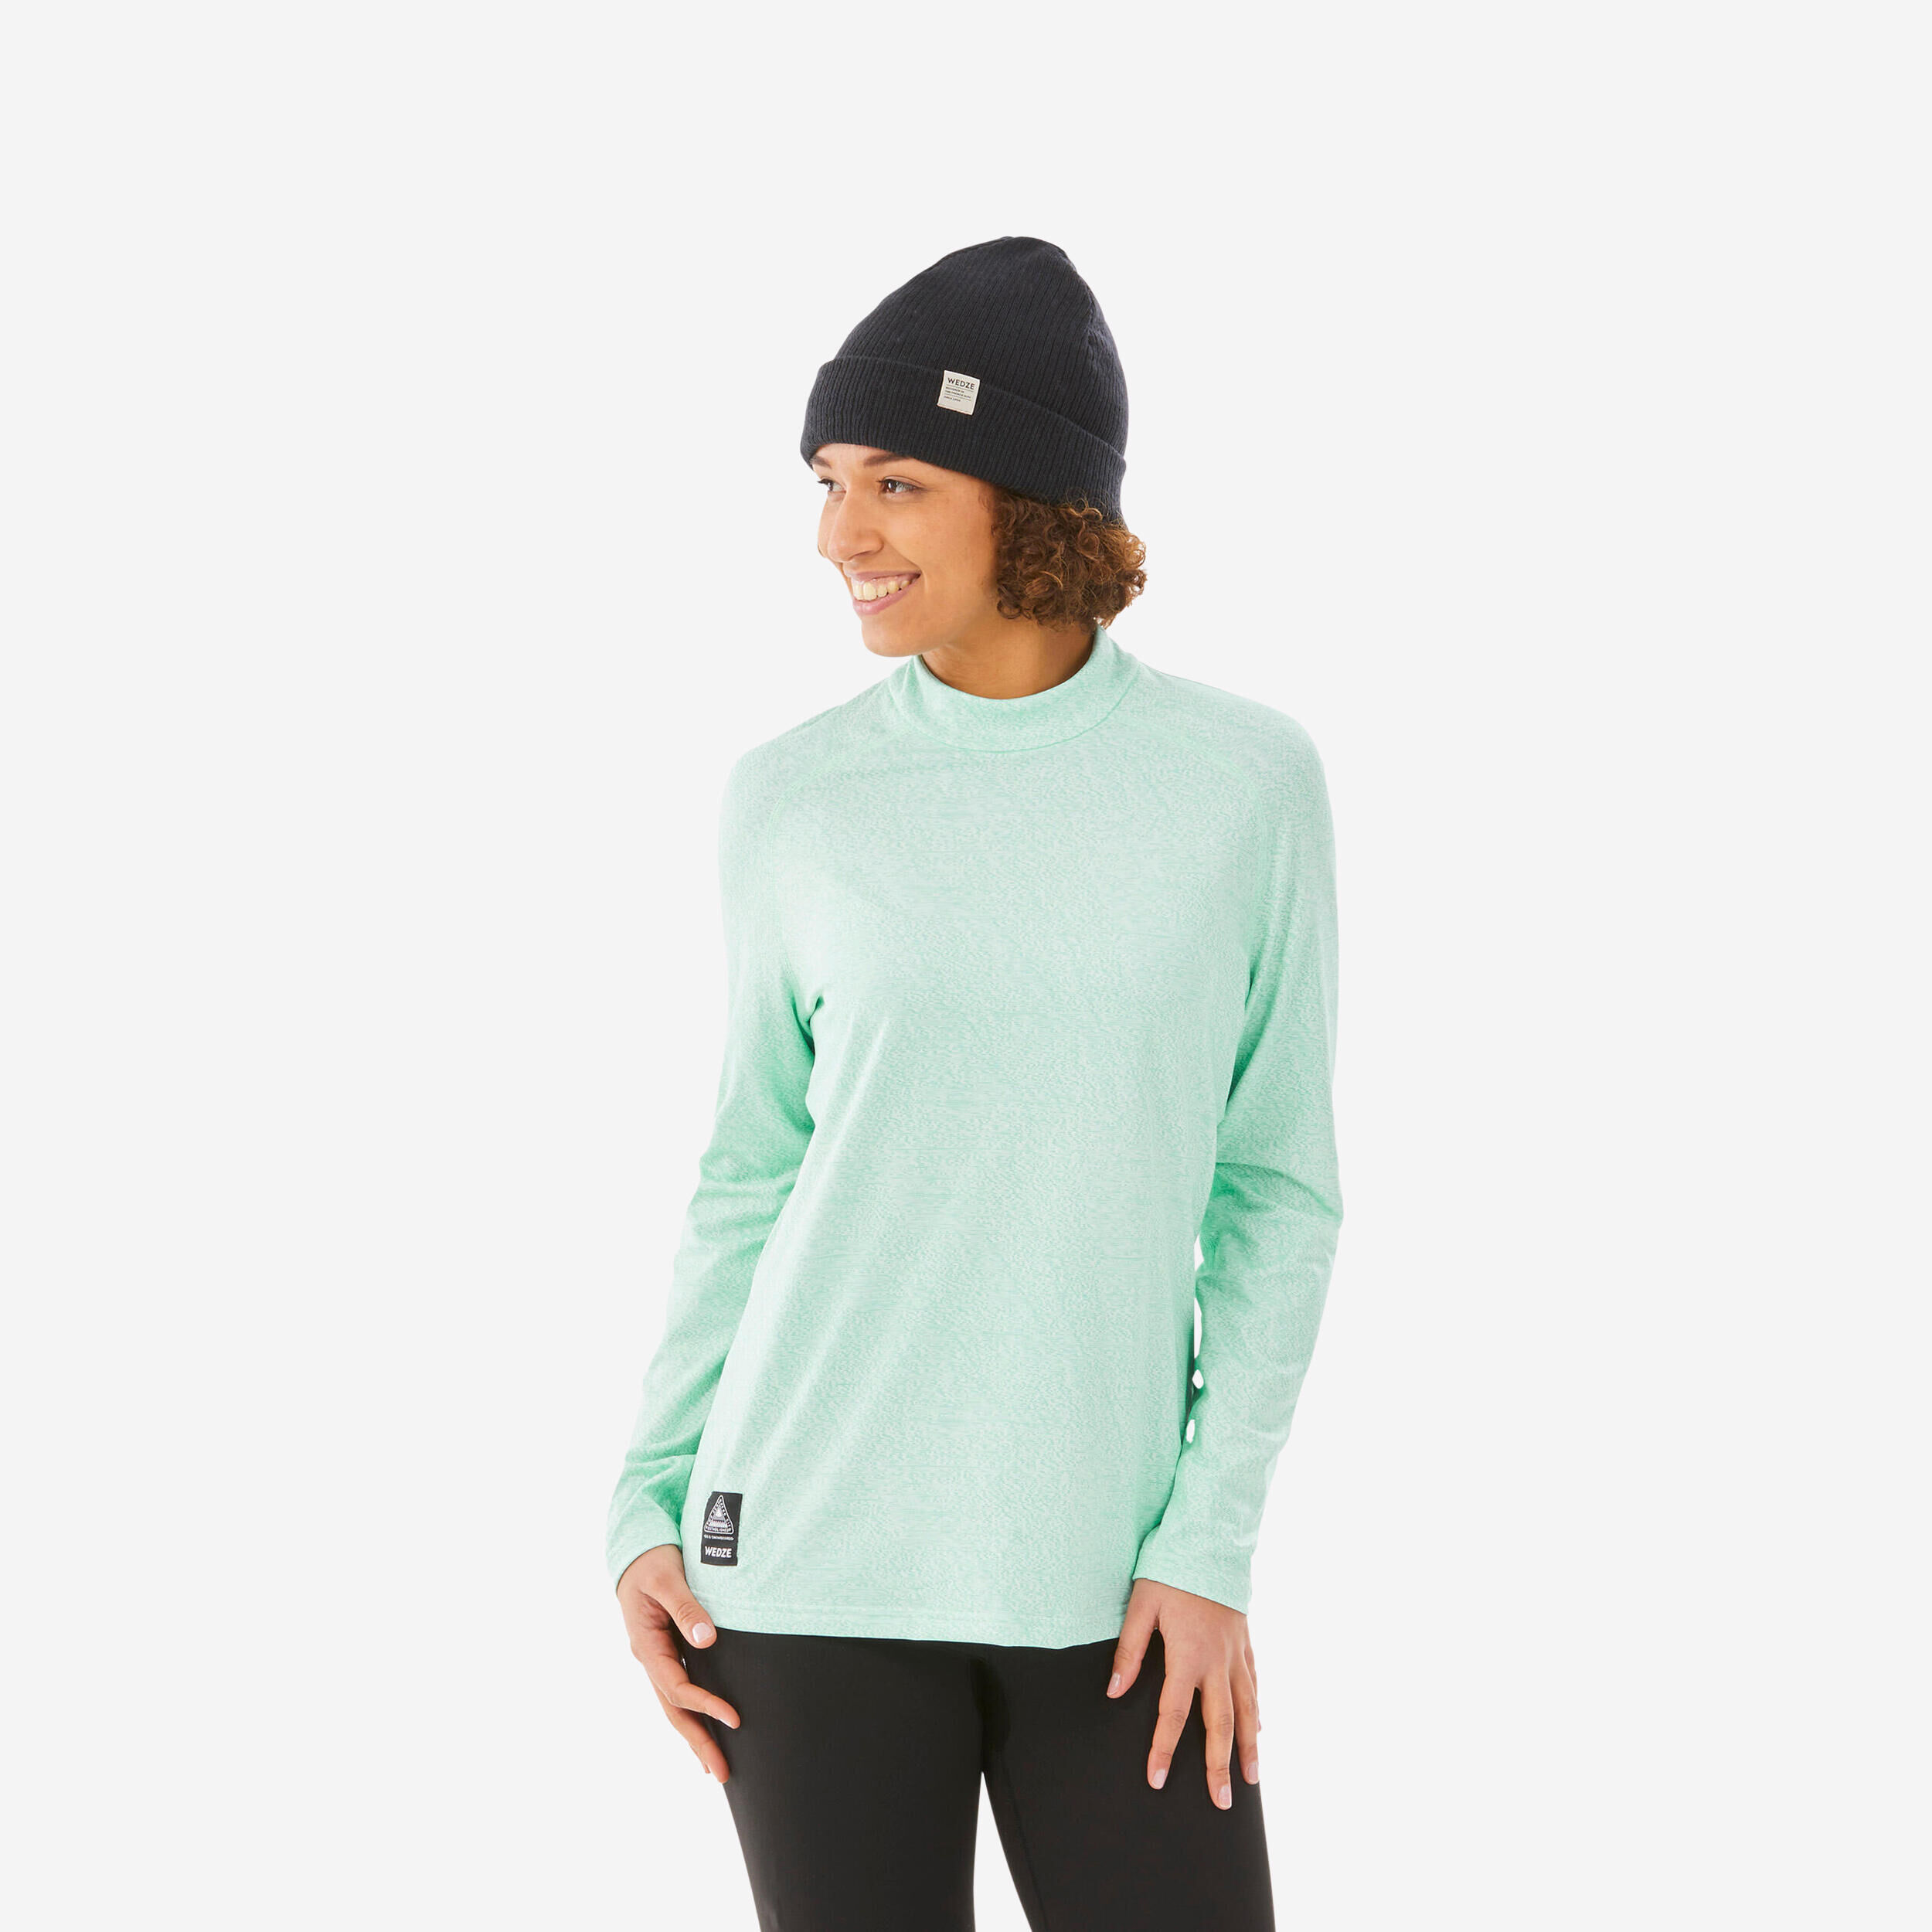 WEDZE Women's BL 500 thermal base layer relaxed-fit ski top - Green design